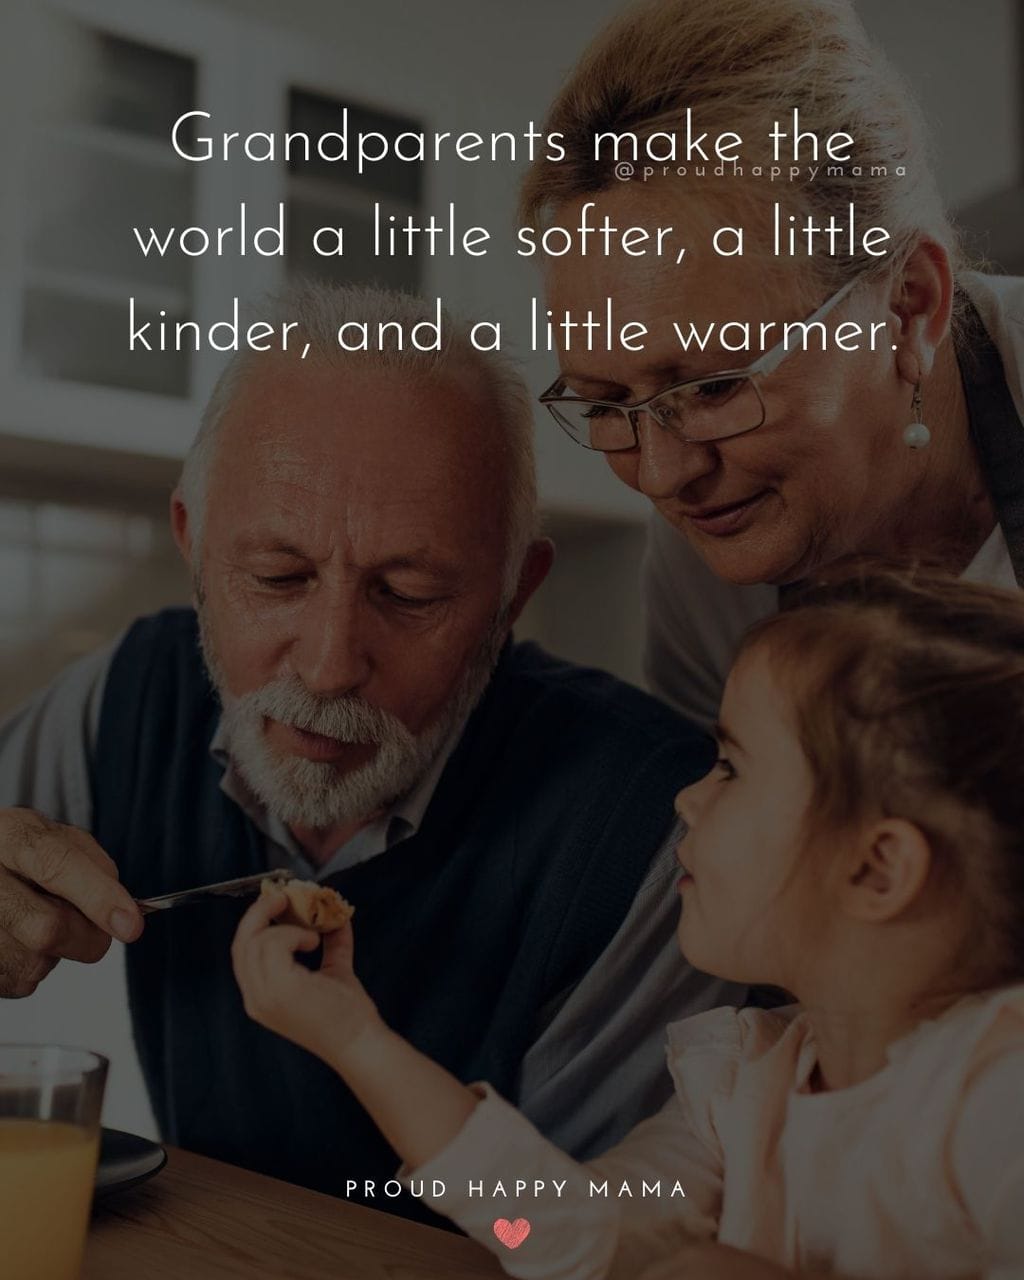 Quotes About Grandparents | Grandparents make the world a little softer, a little kinder, and a little warmer.